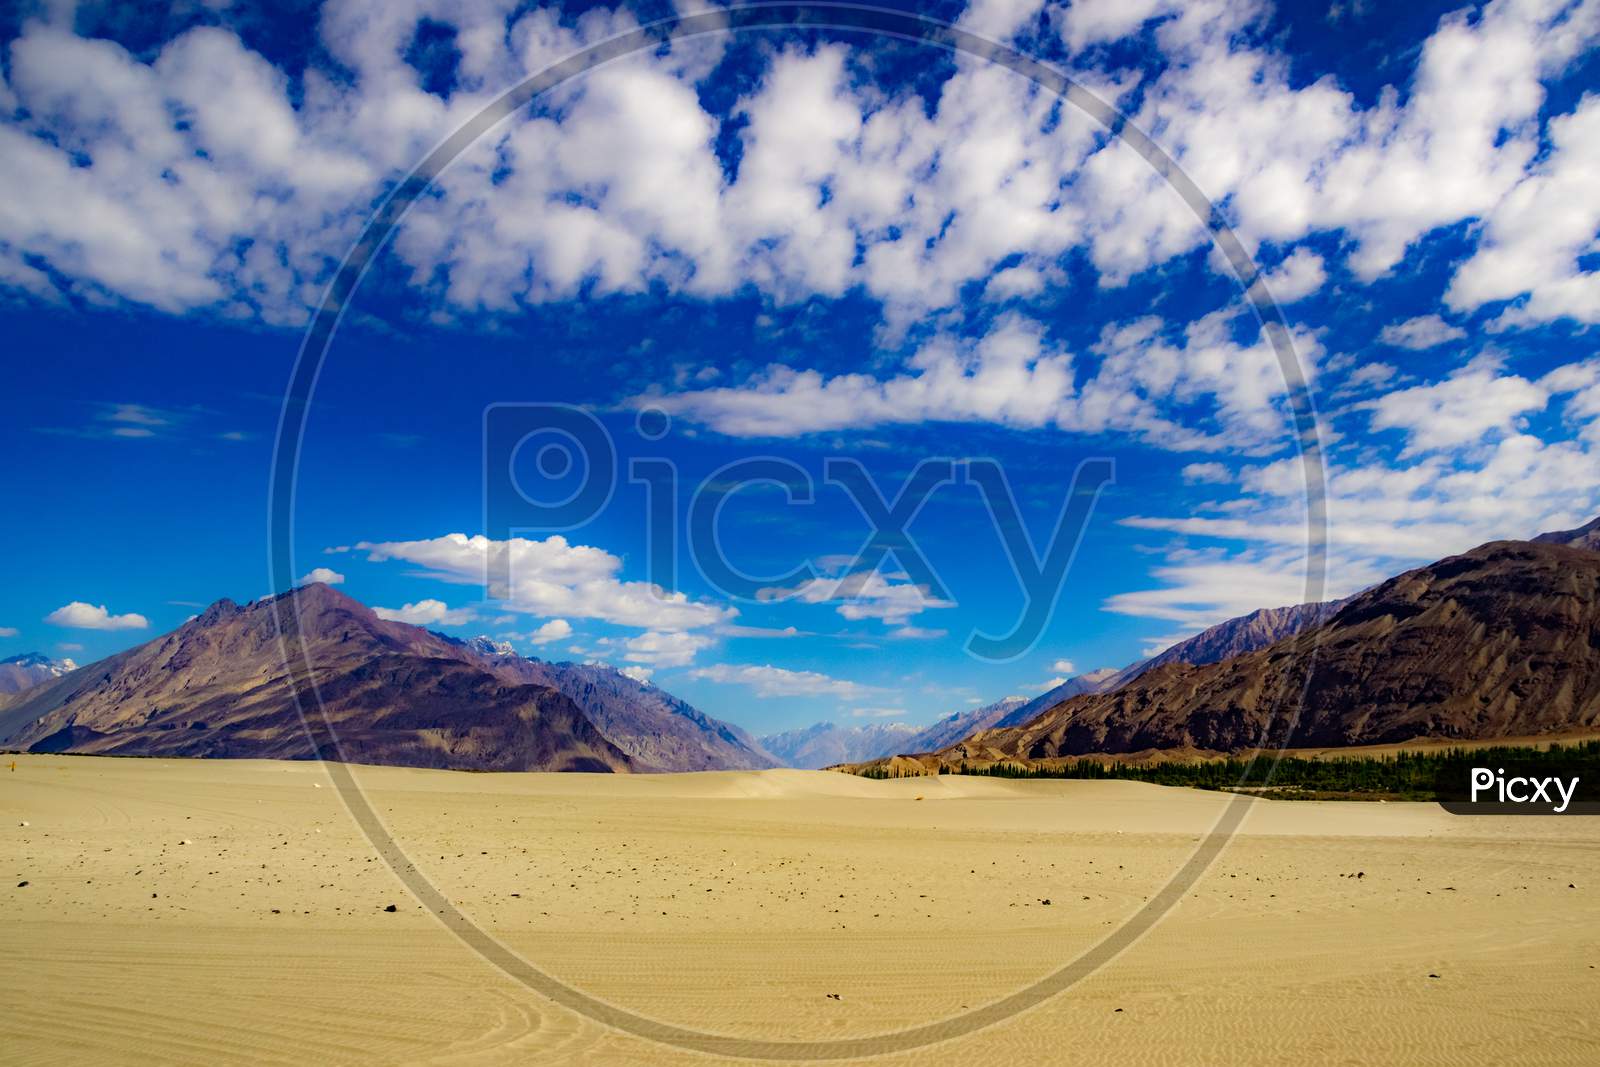 High Dynamic Range Image Of Barren Mountain In A Desert With Deep Blue Sky And White Patchy Clouds In Ladakh, Jammu And Kashmir, India